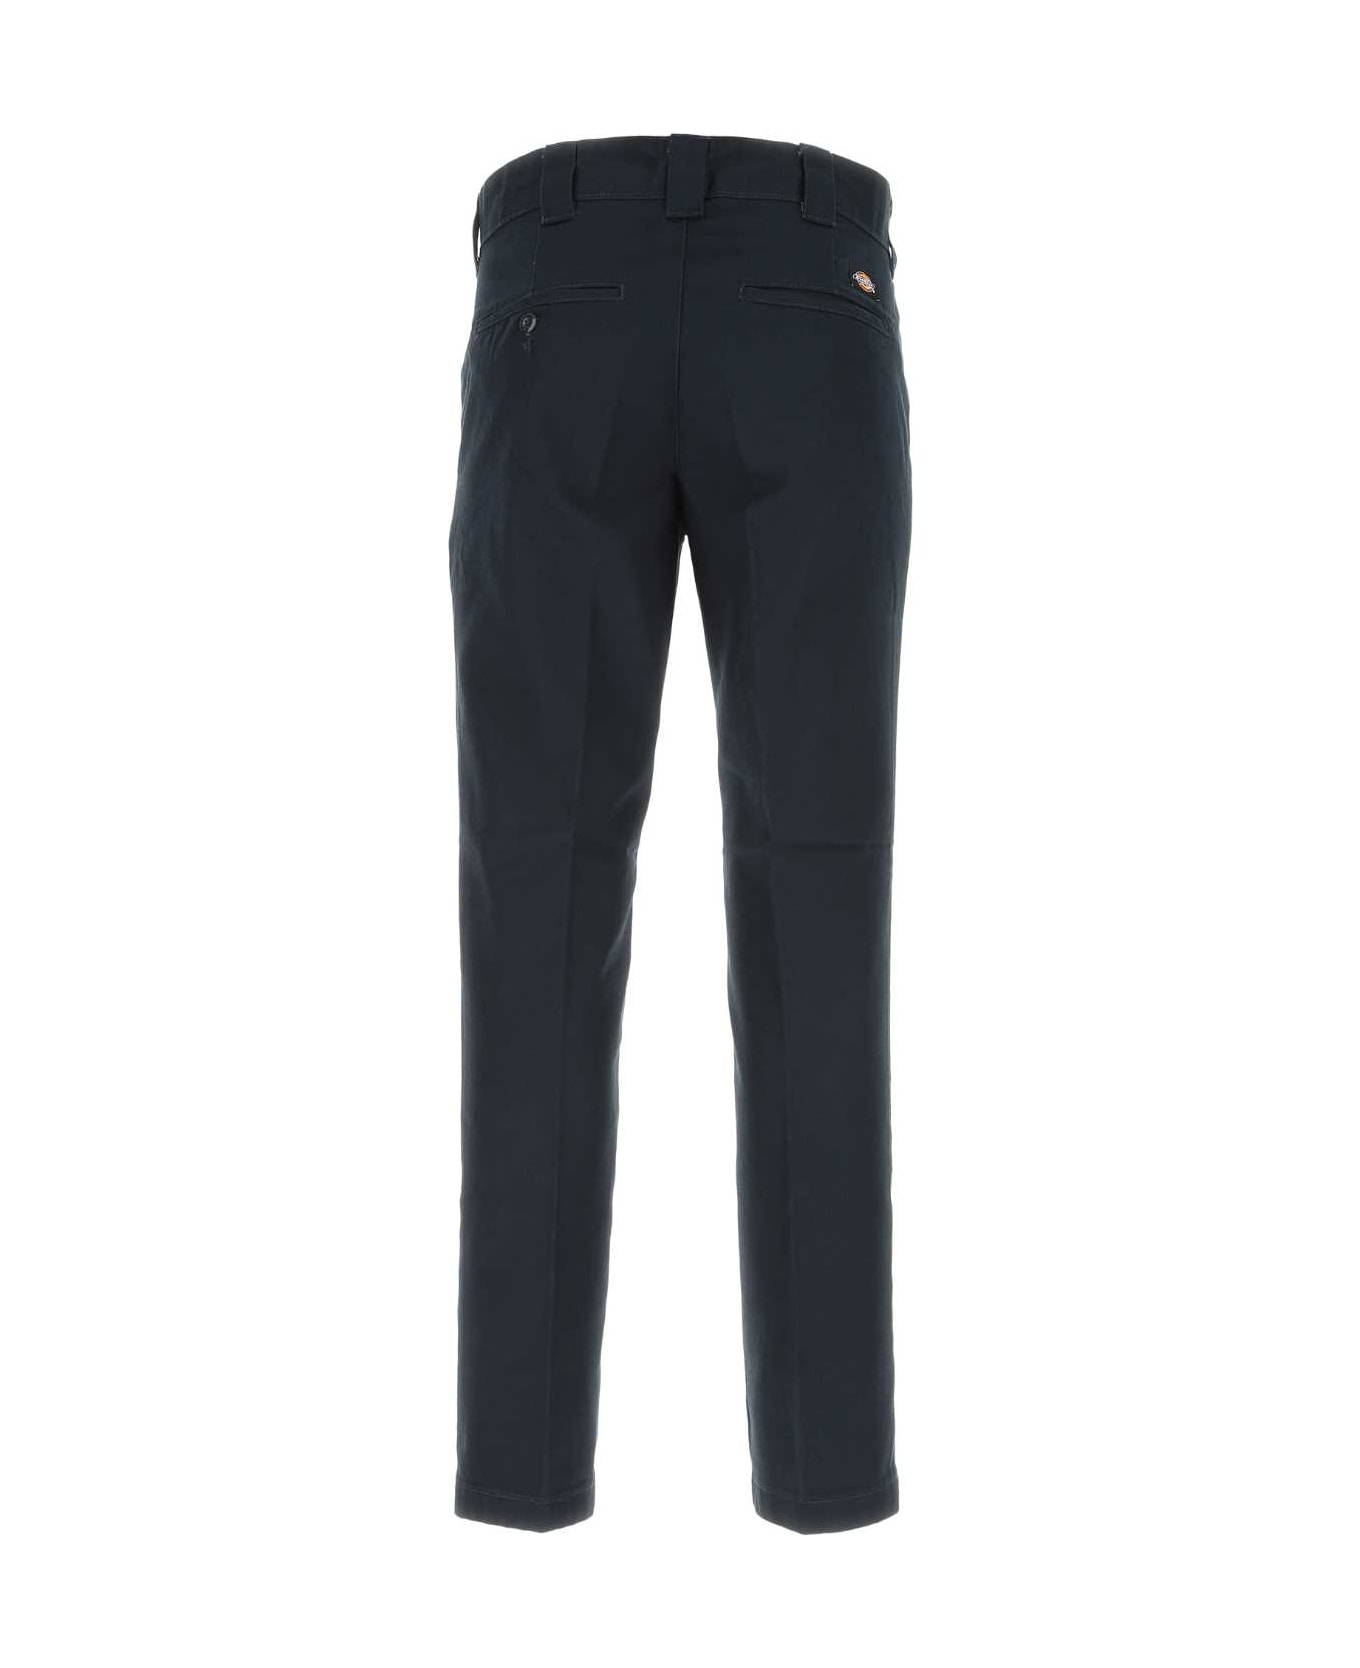 Dickies Midnight Blue Polyester Blend Pant - DNX1 ボトムス